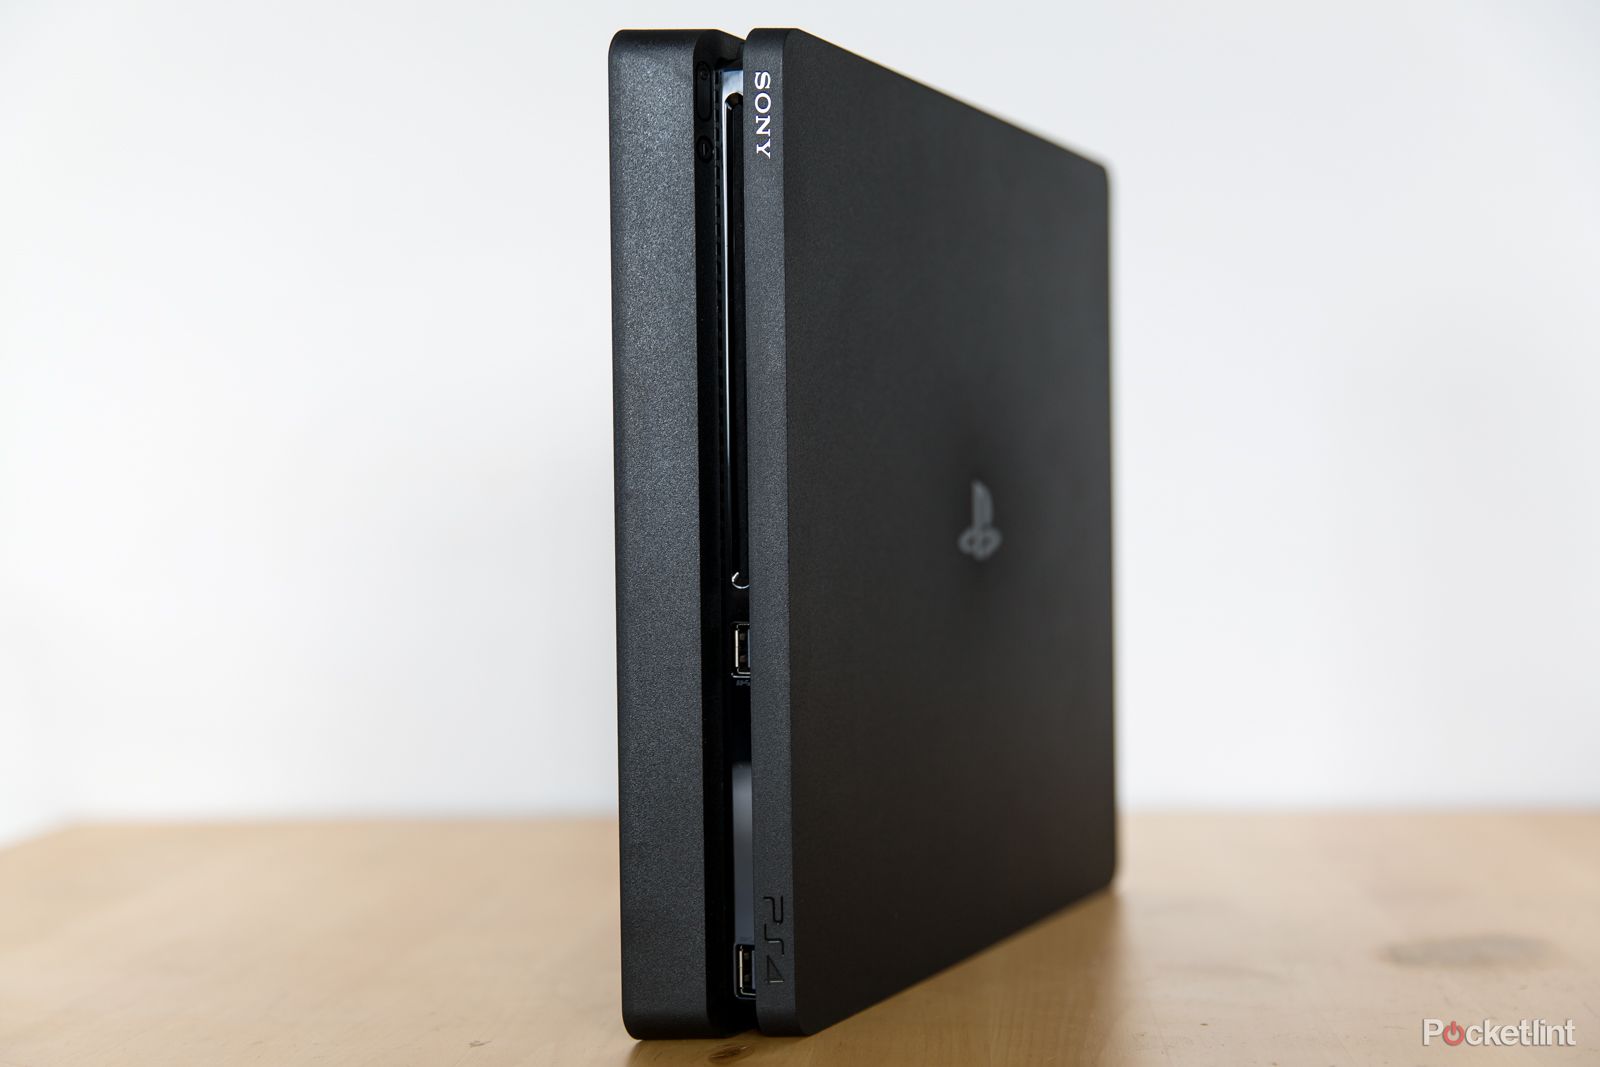 Sony PS4 Slim review